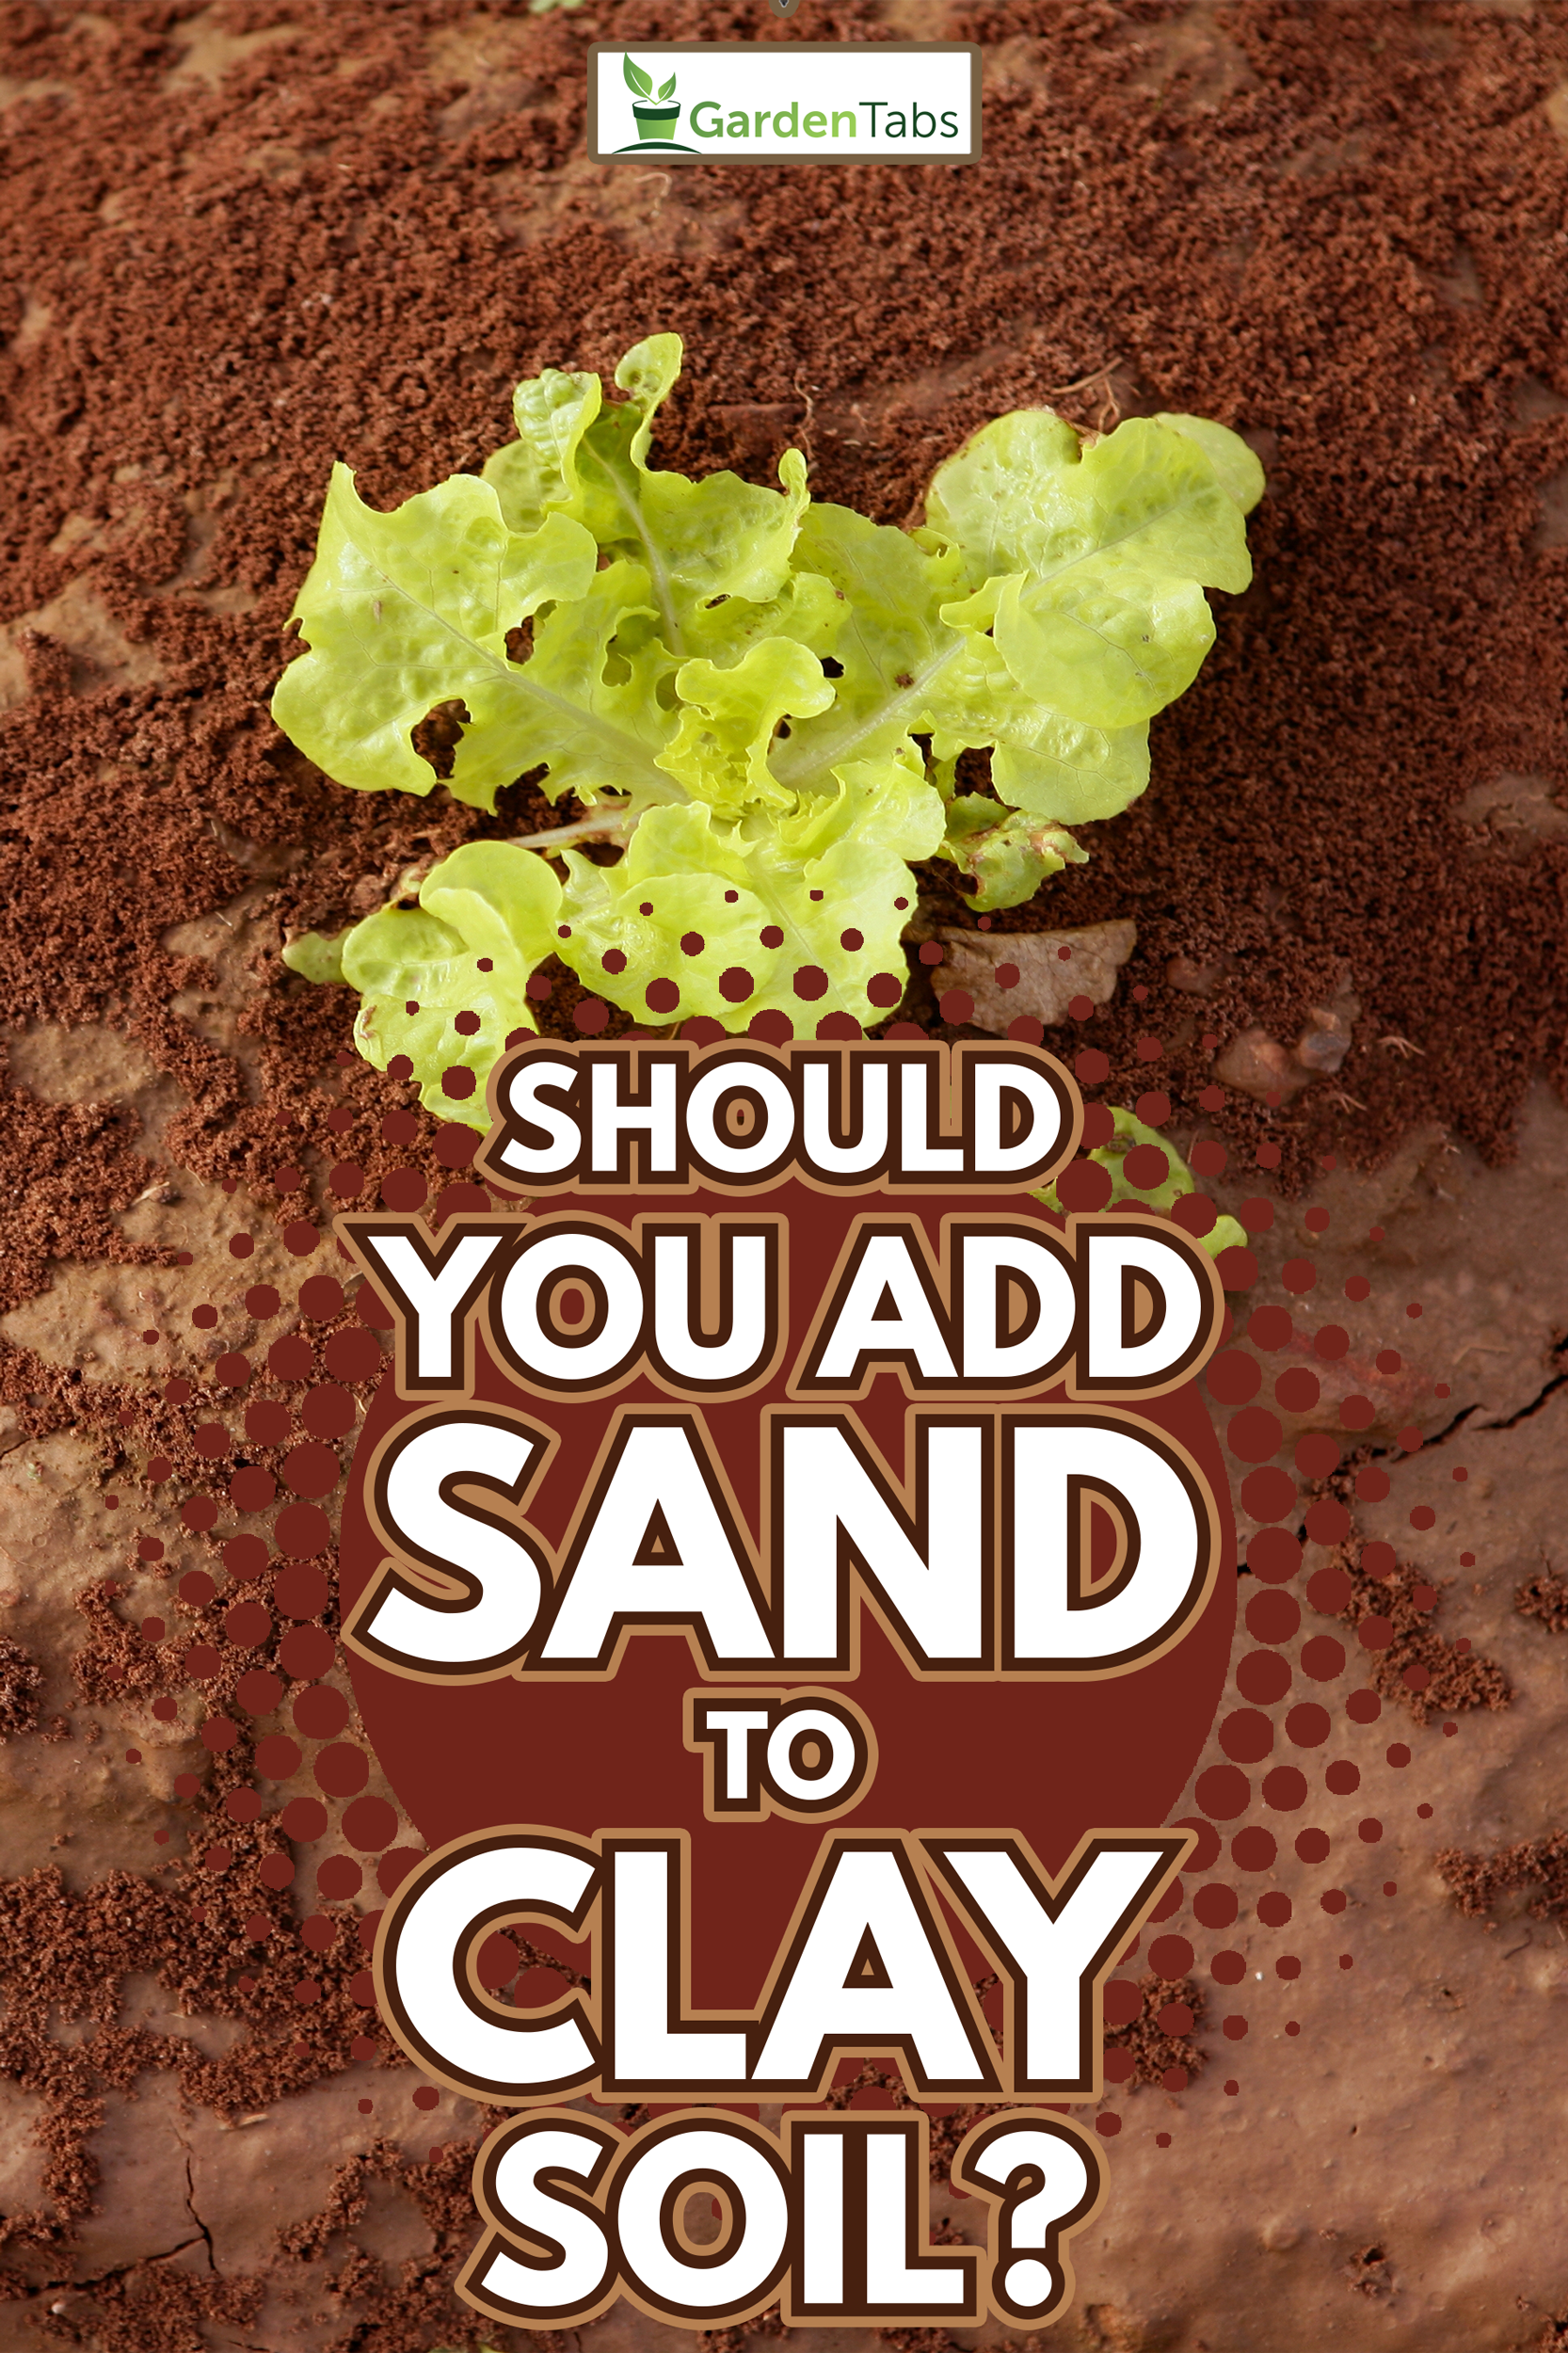 Lettuce green outbreak sprout over red clay floor, texture background - Should You Add Sand To Clay 